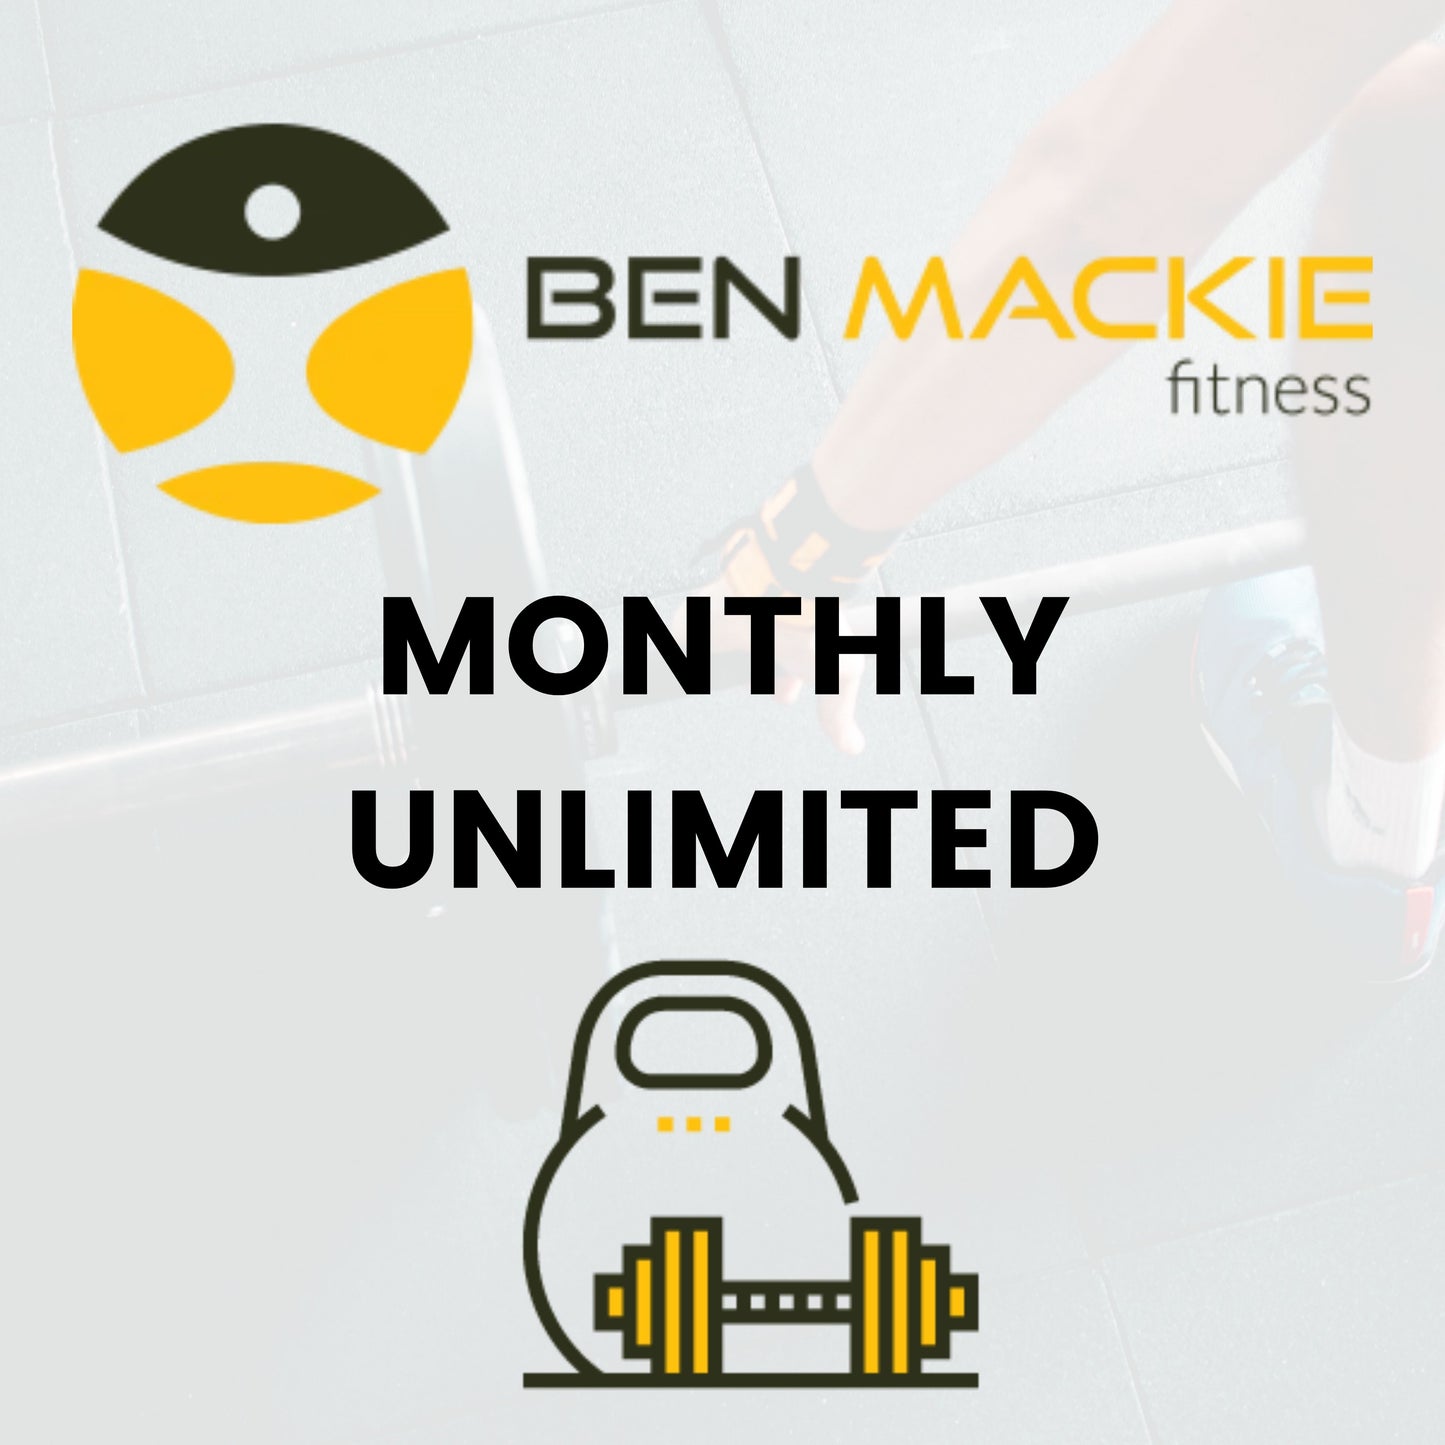 Ben Mackie Unlimited Fitness (Monthly)